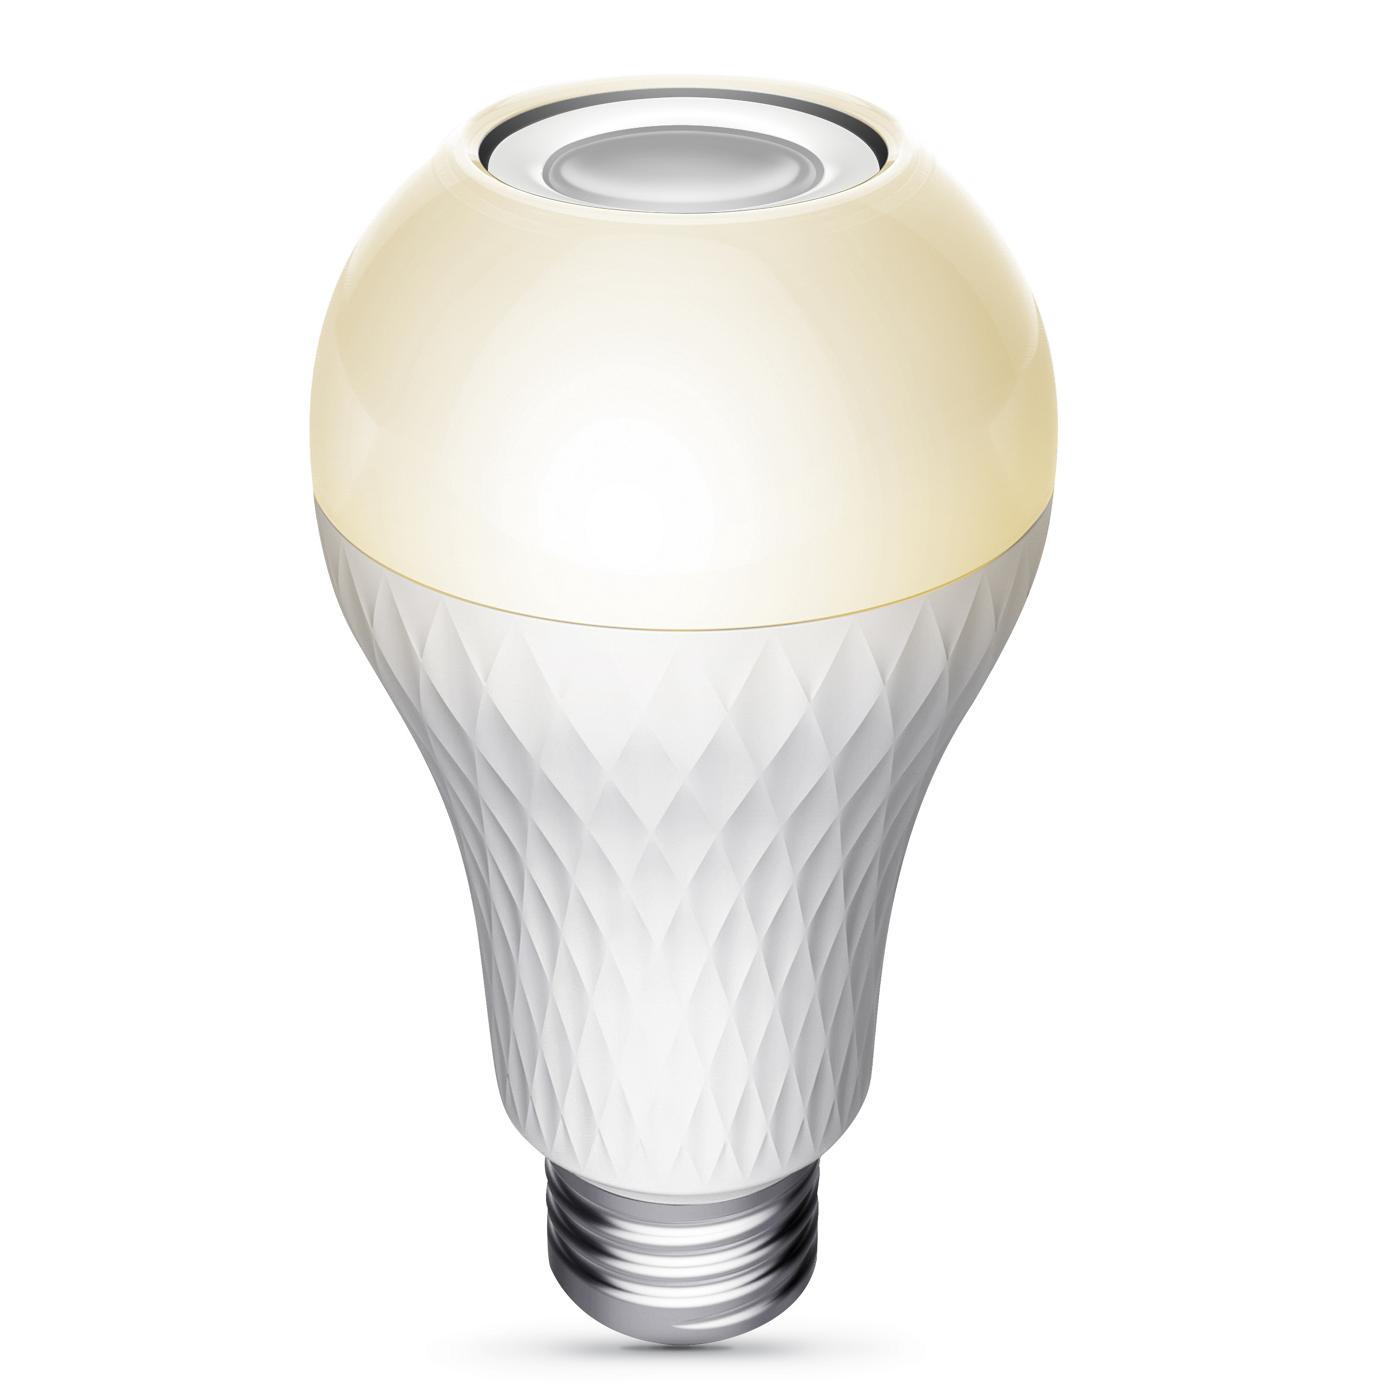 Feit Electric A19 60-Watt LED Light Bulb with Bluetooth Speaker; image 2 of 2